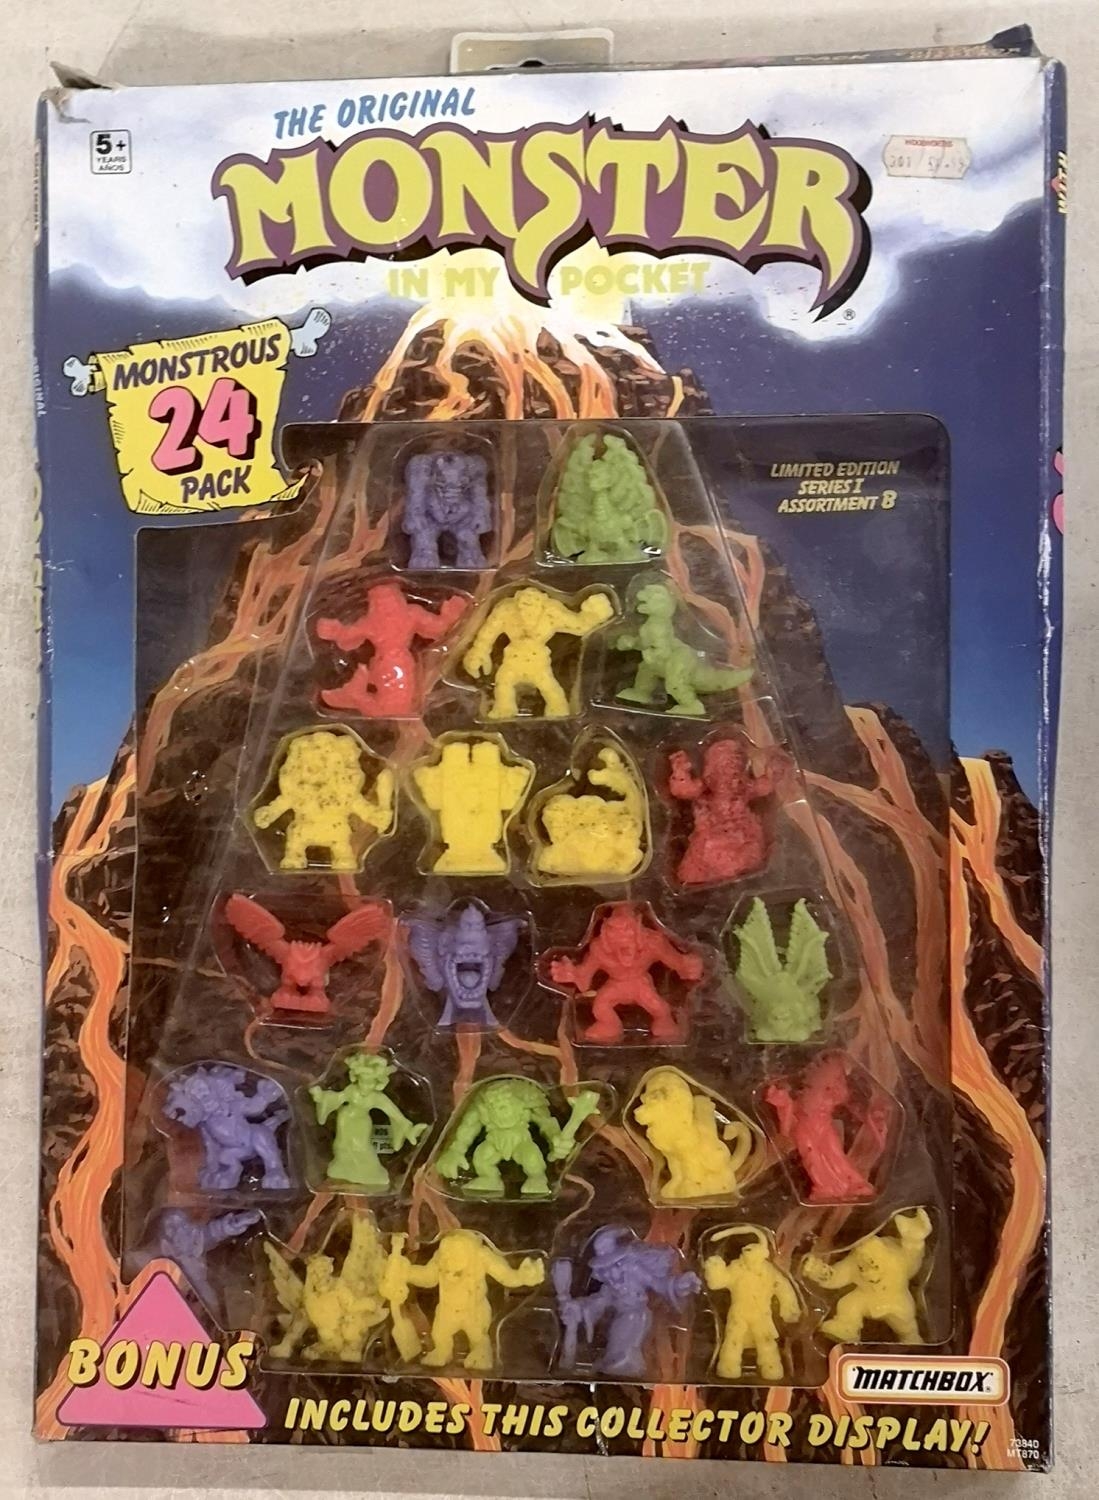 Unopened Matchbox monsters in my pocket series 1 assortment B 24